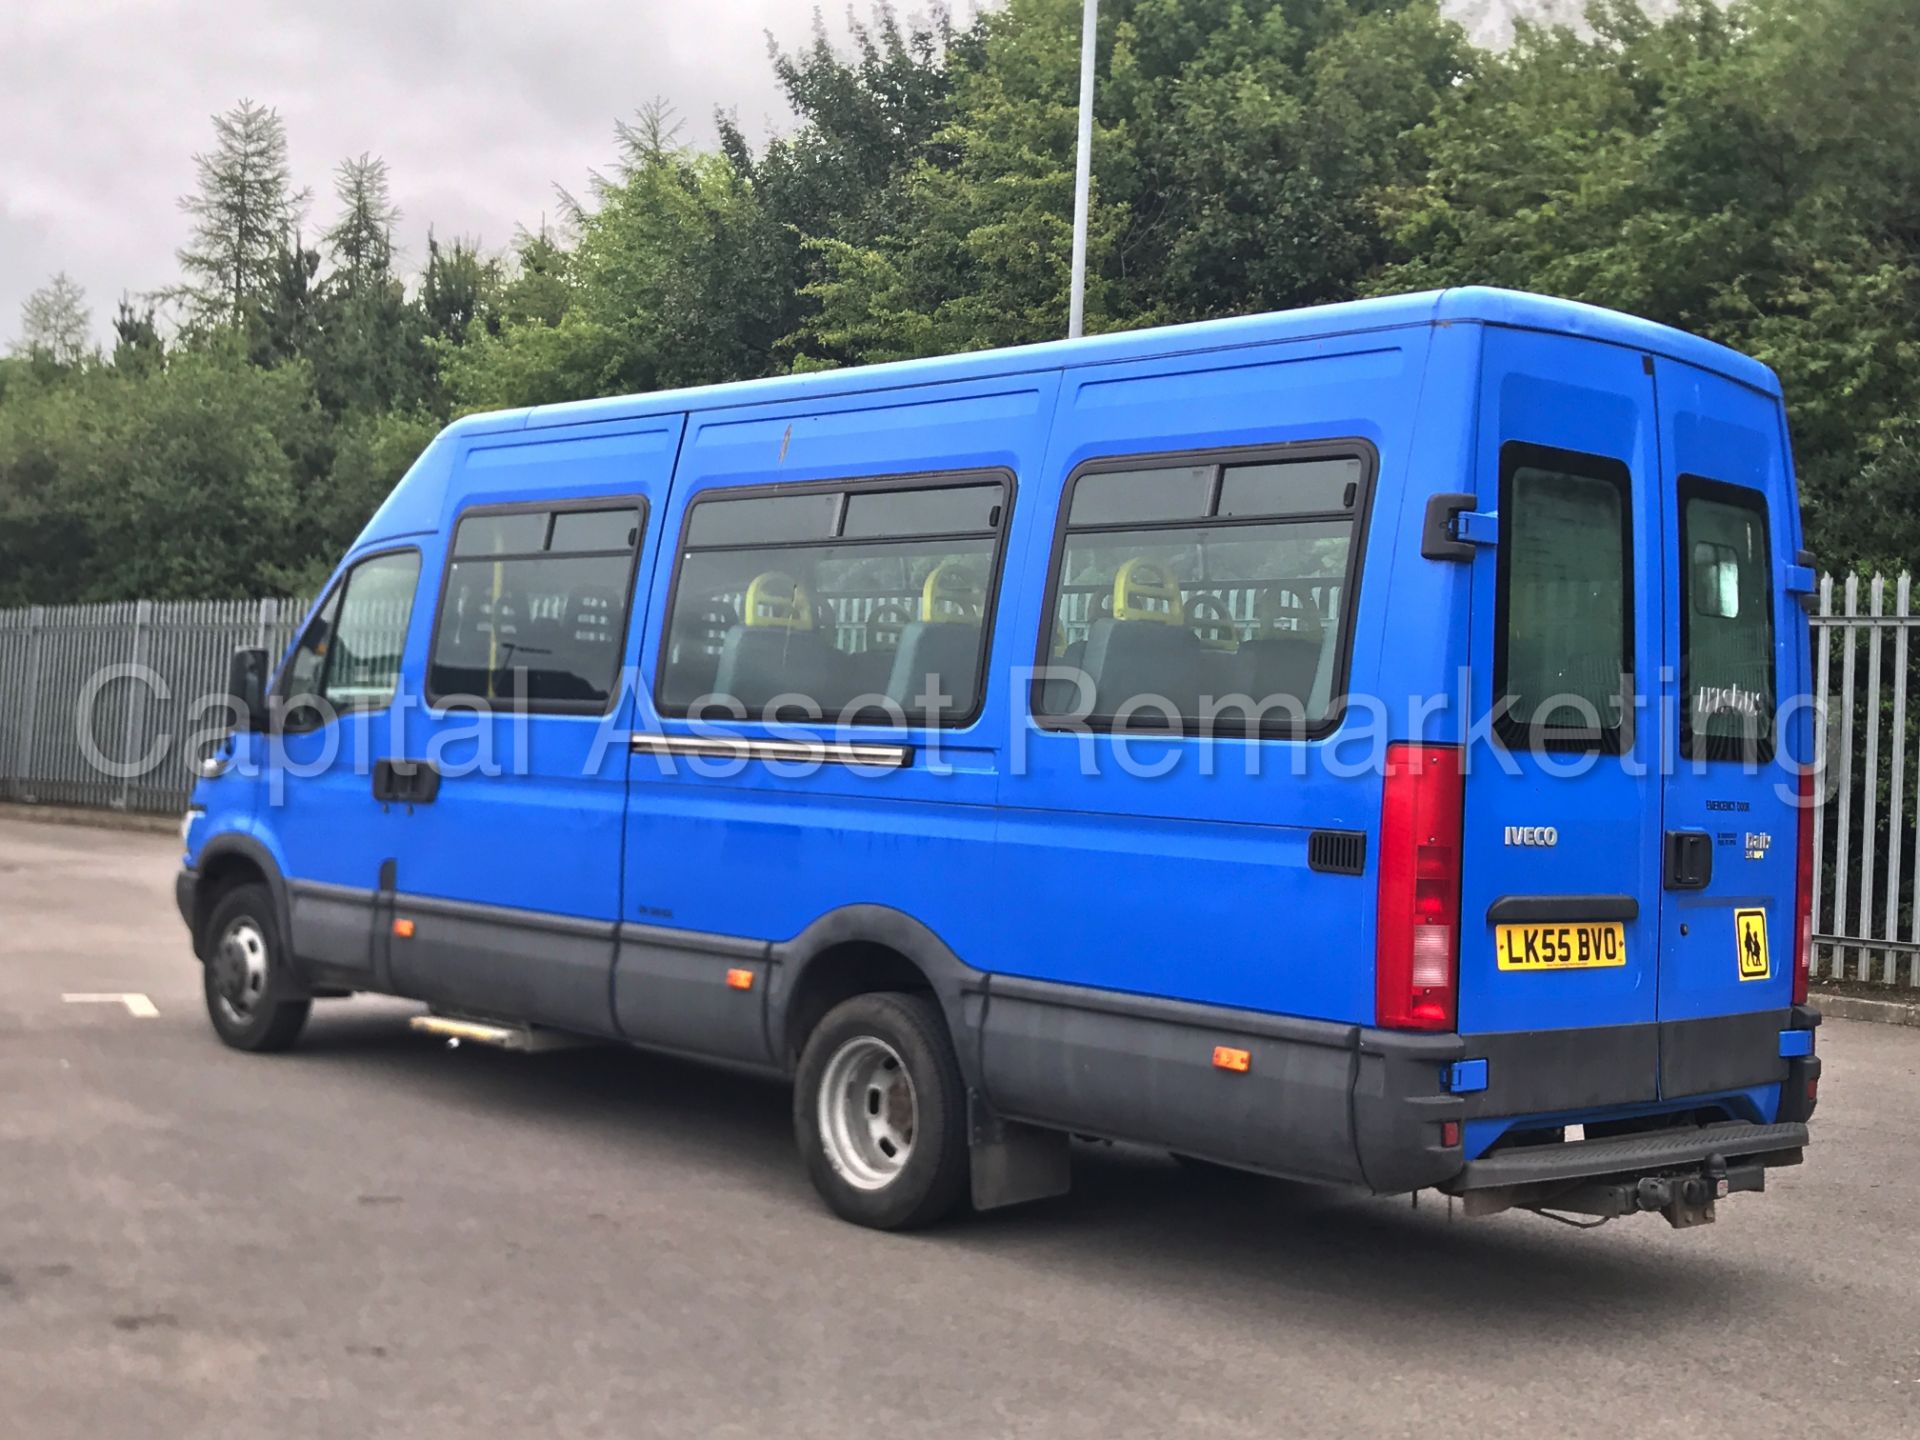 IVECO DAILY 40C14 '17 SEATER COACH / BUS' (2006 MODEL) '3.0 DIESEL - 6 SPEED' *IRIS BUS* (1 OWNER) - Image 7 of 23